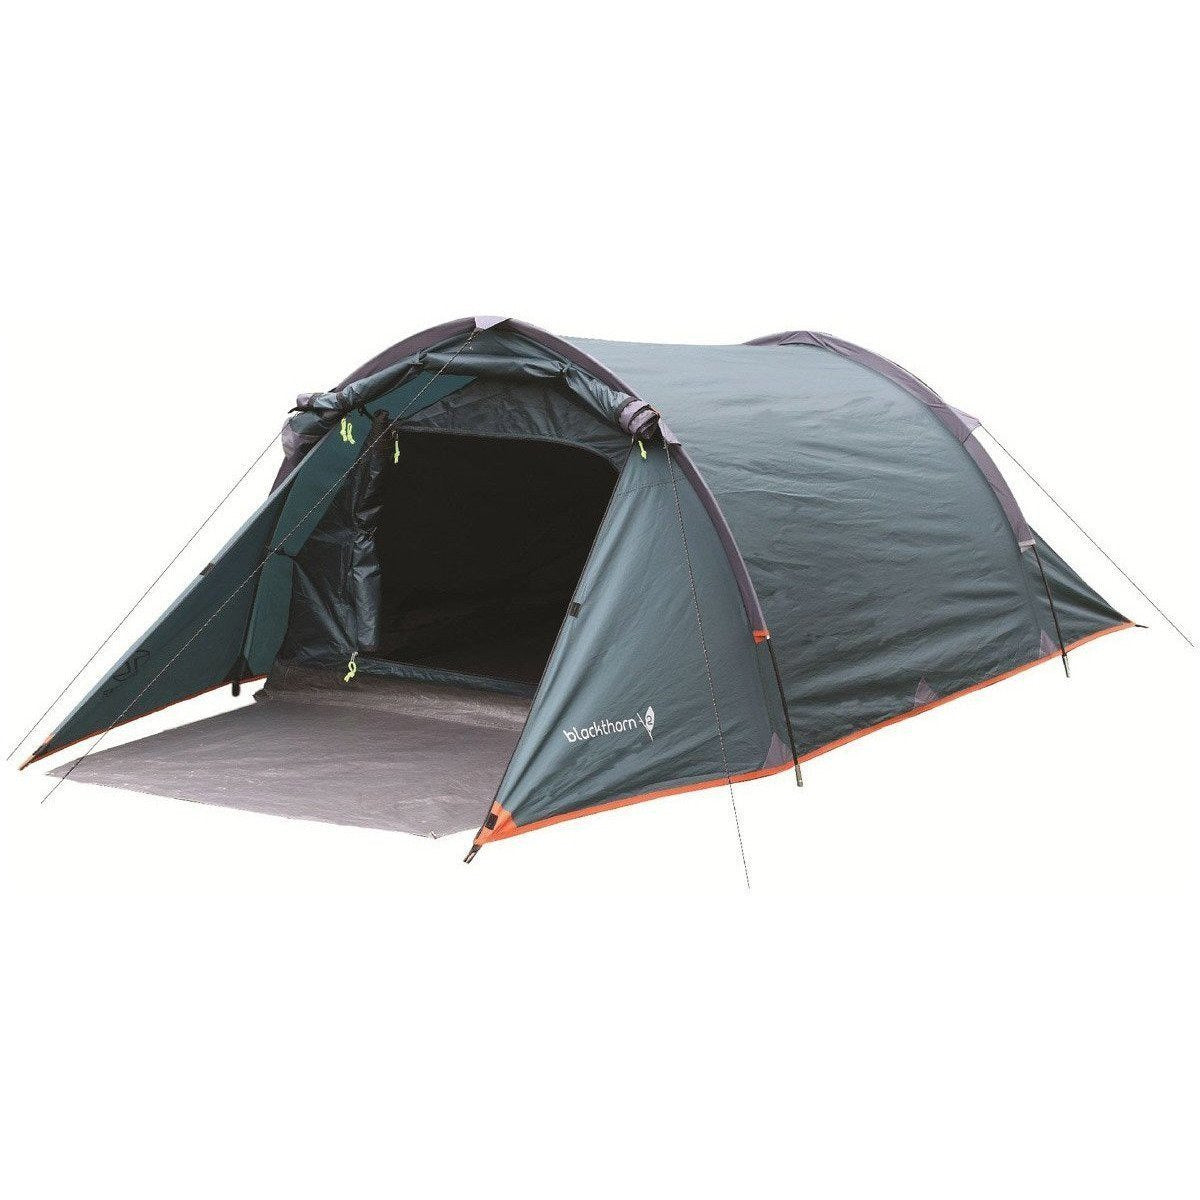 Blackthorn Two Tent  - 2 Person | Highlander | Sleeping & Shelter